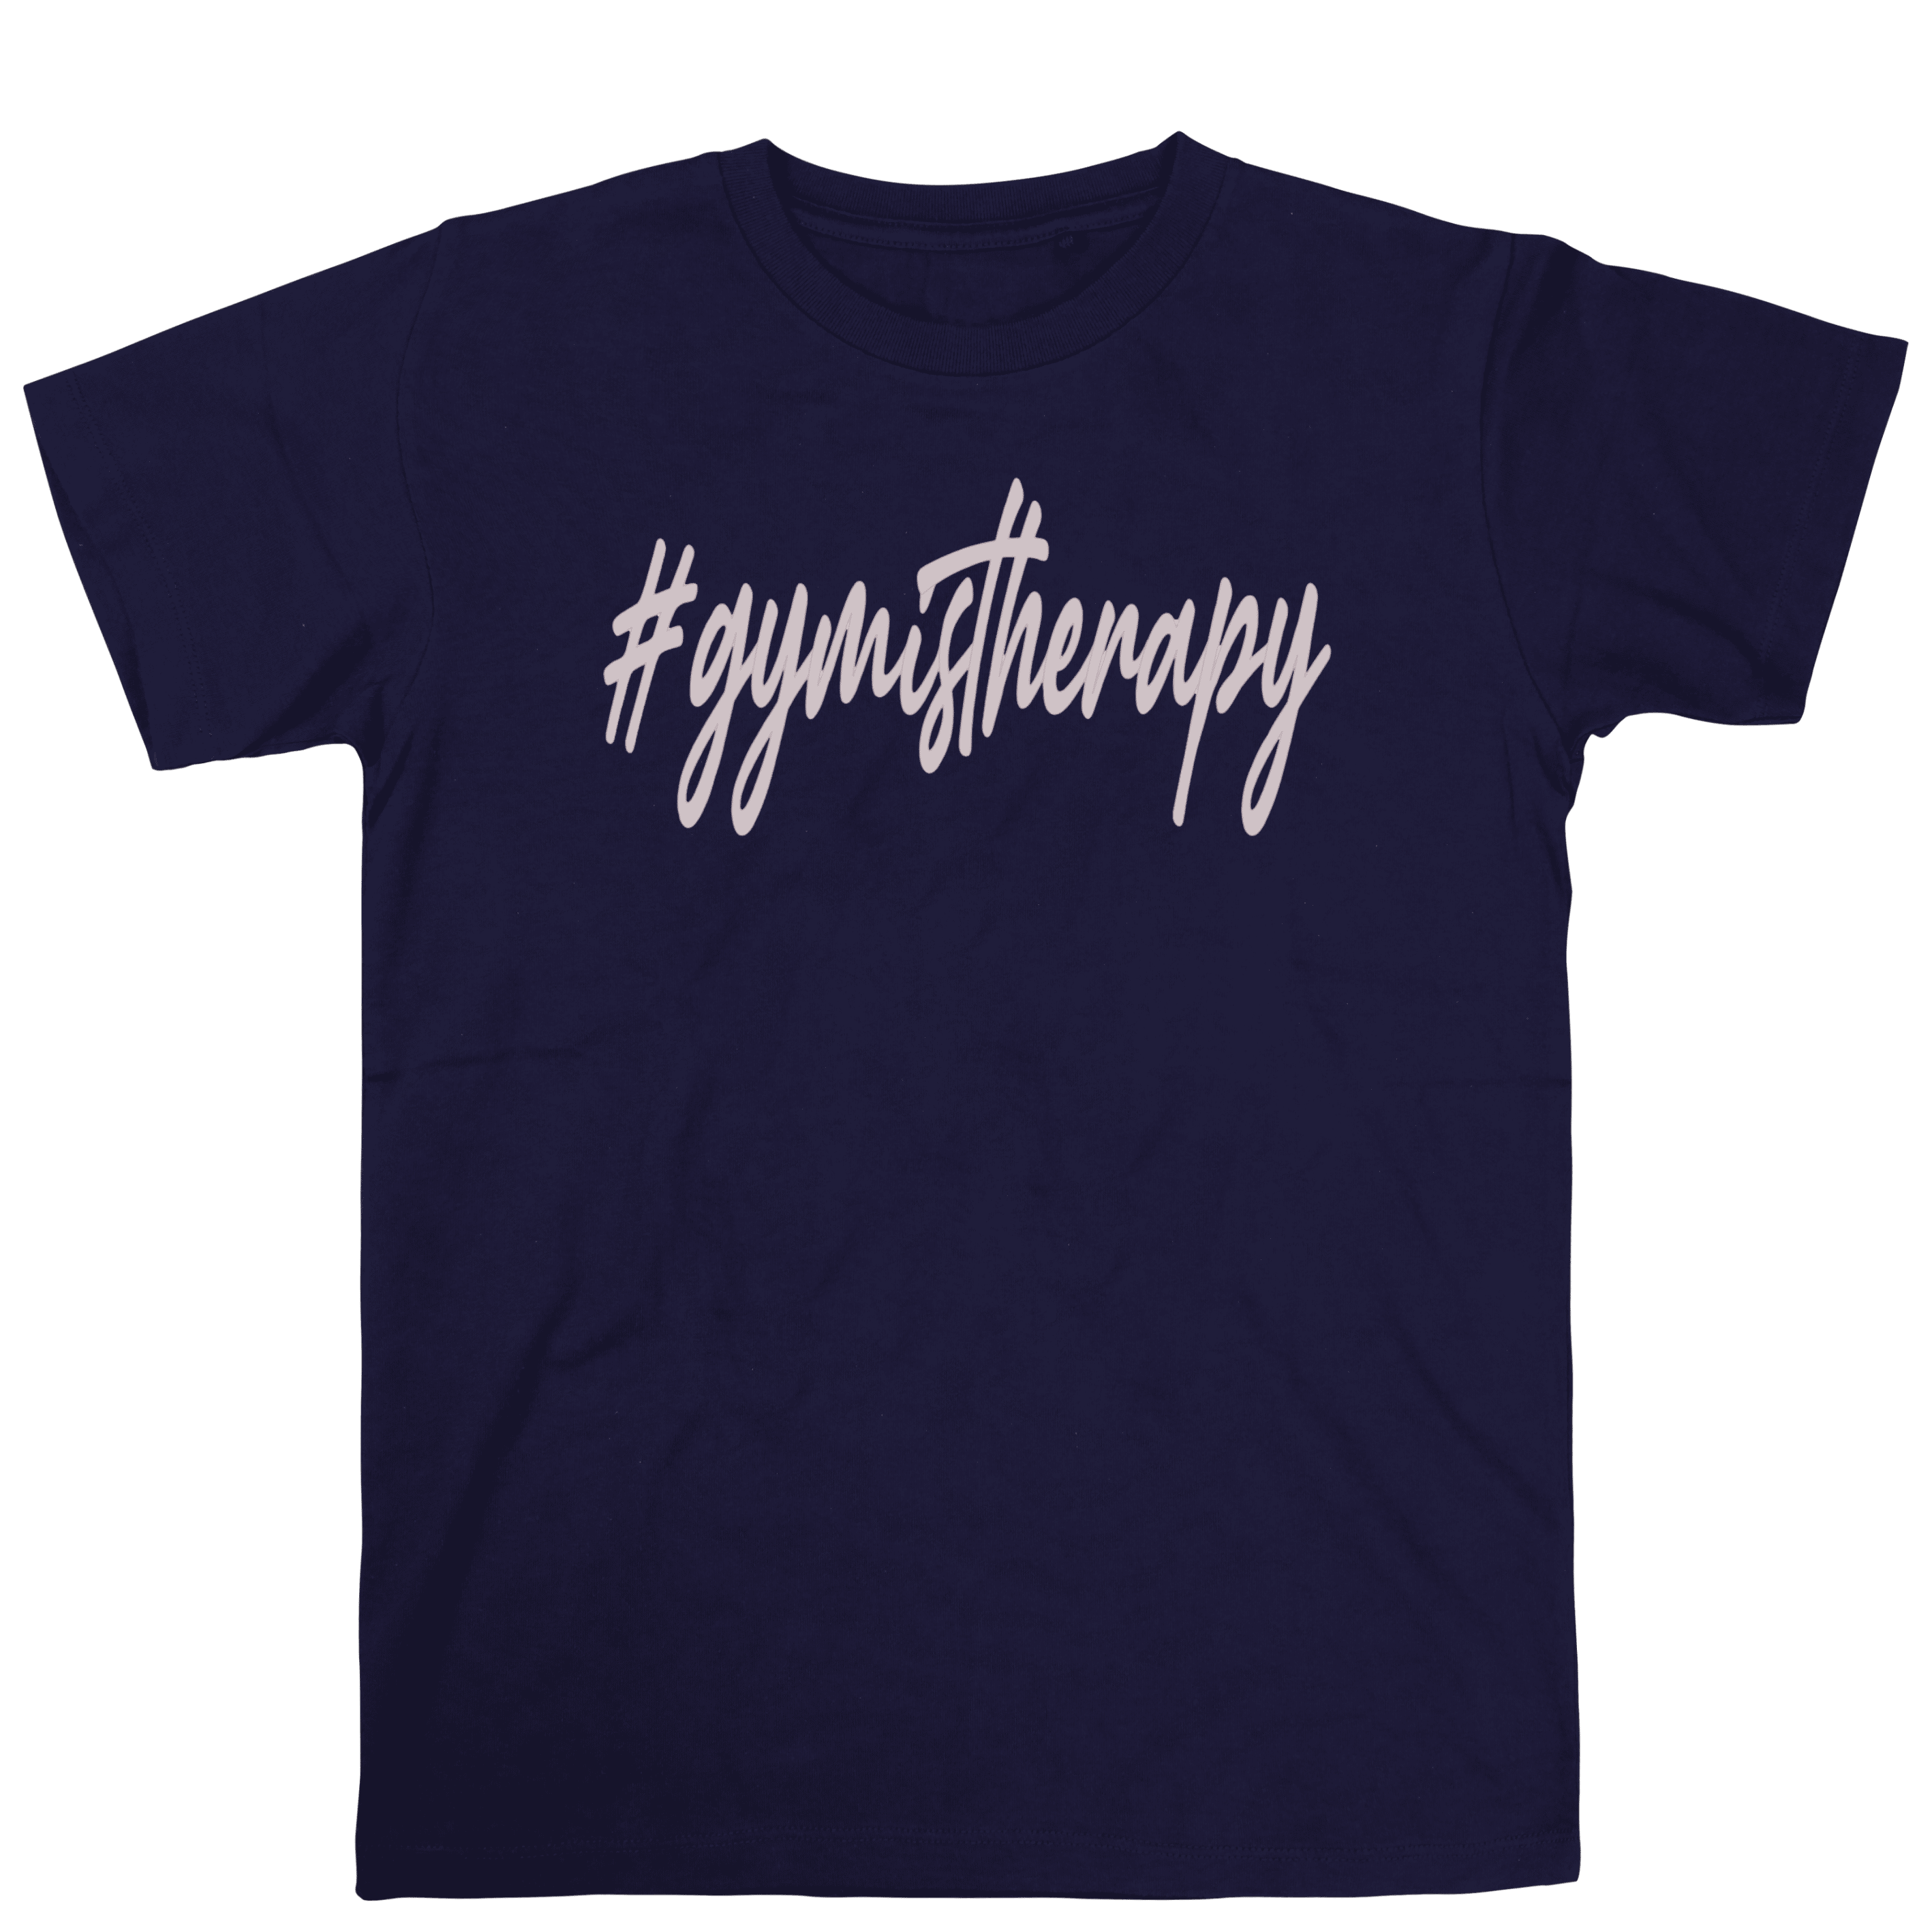 #gymistherapy t-shirt